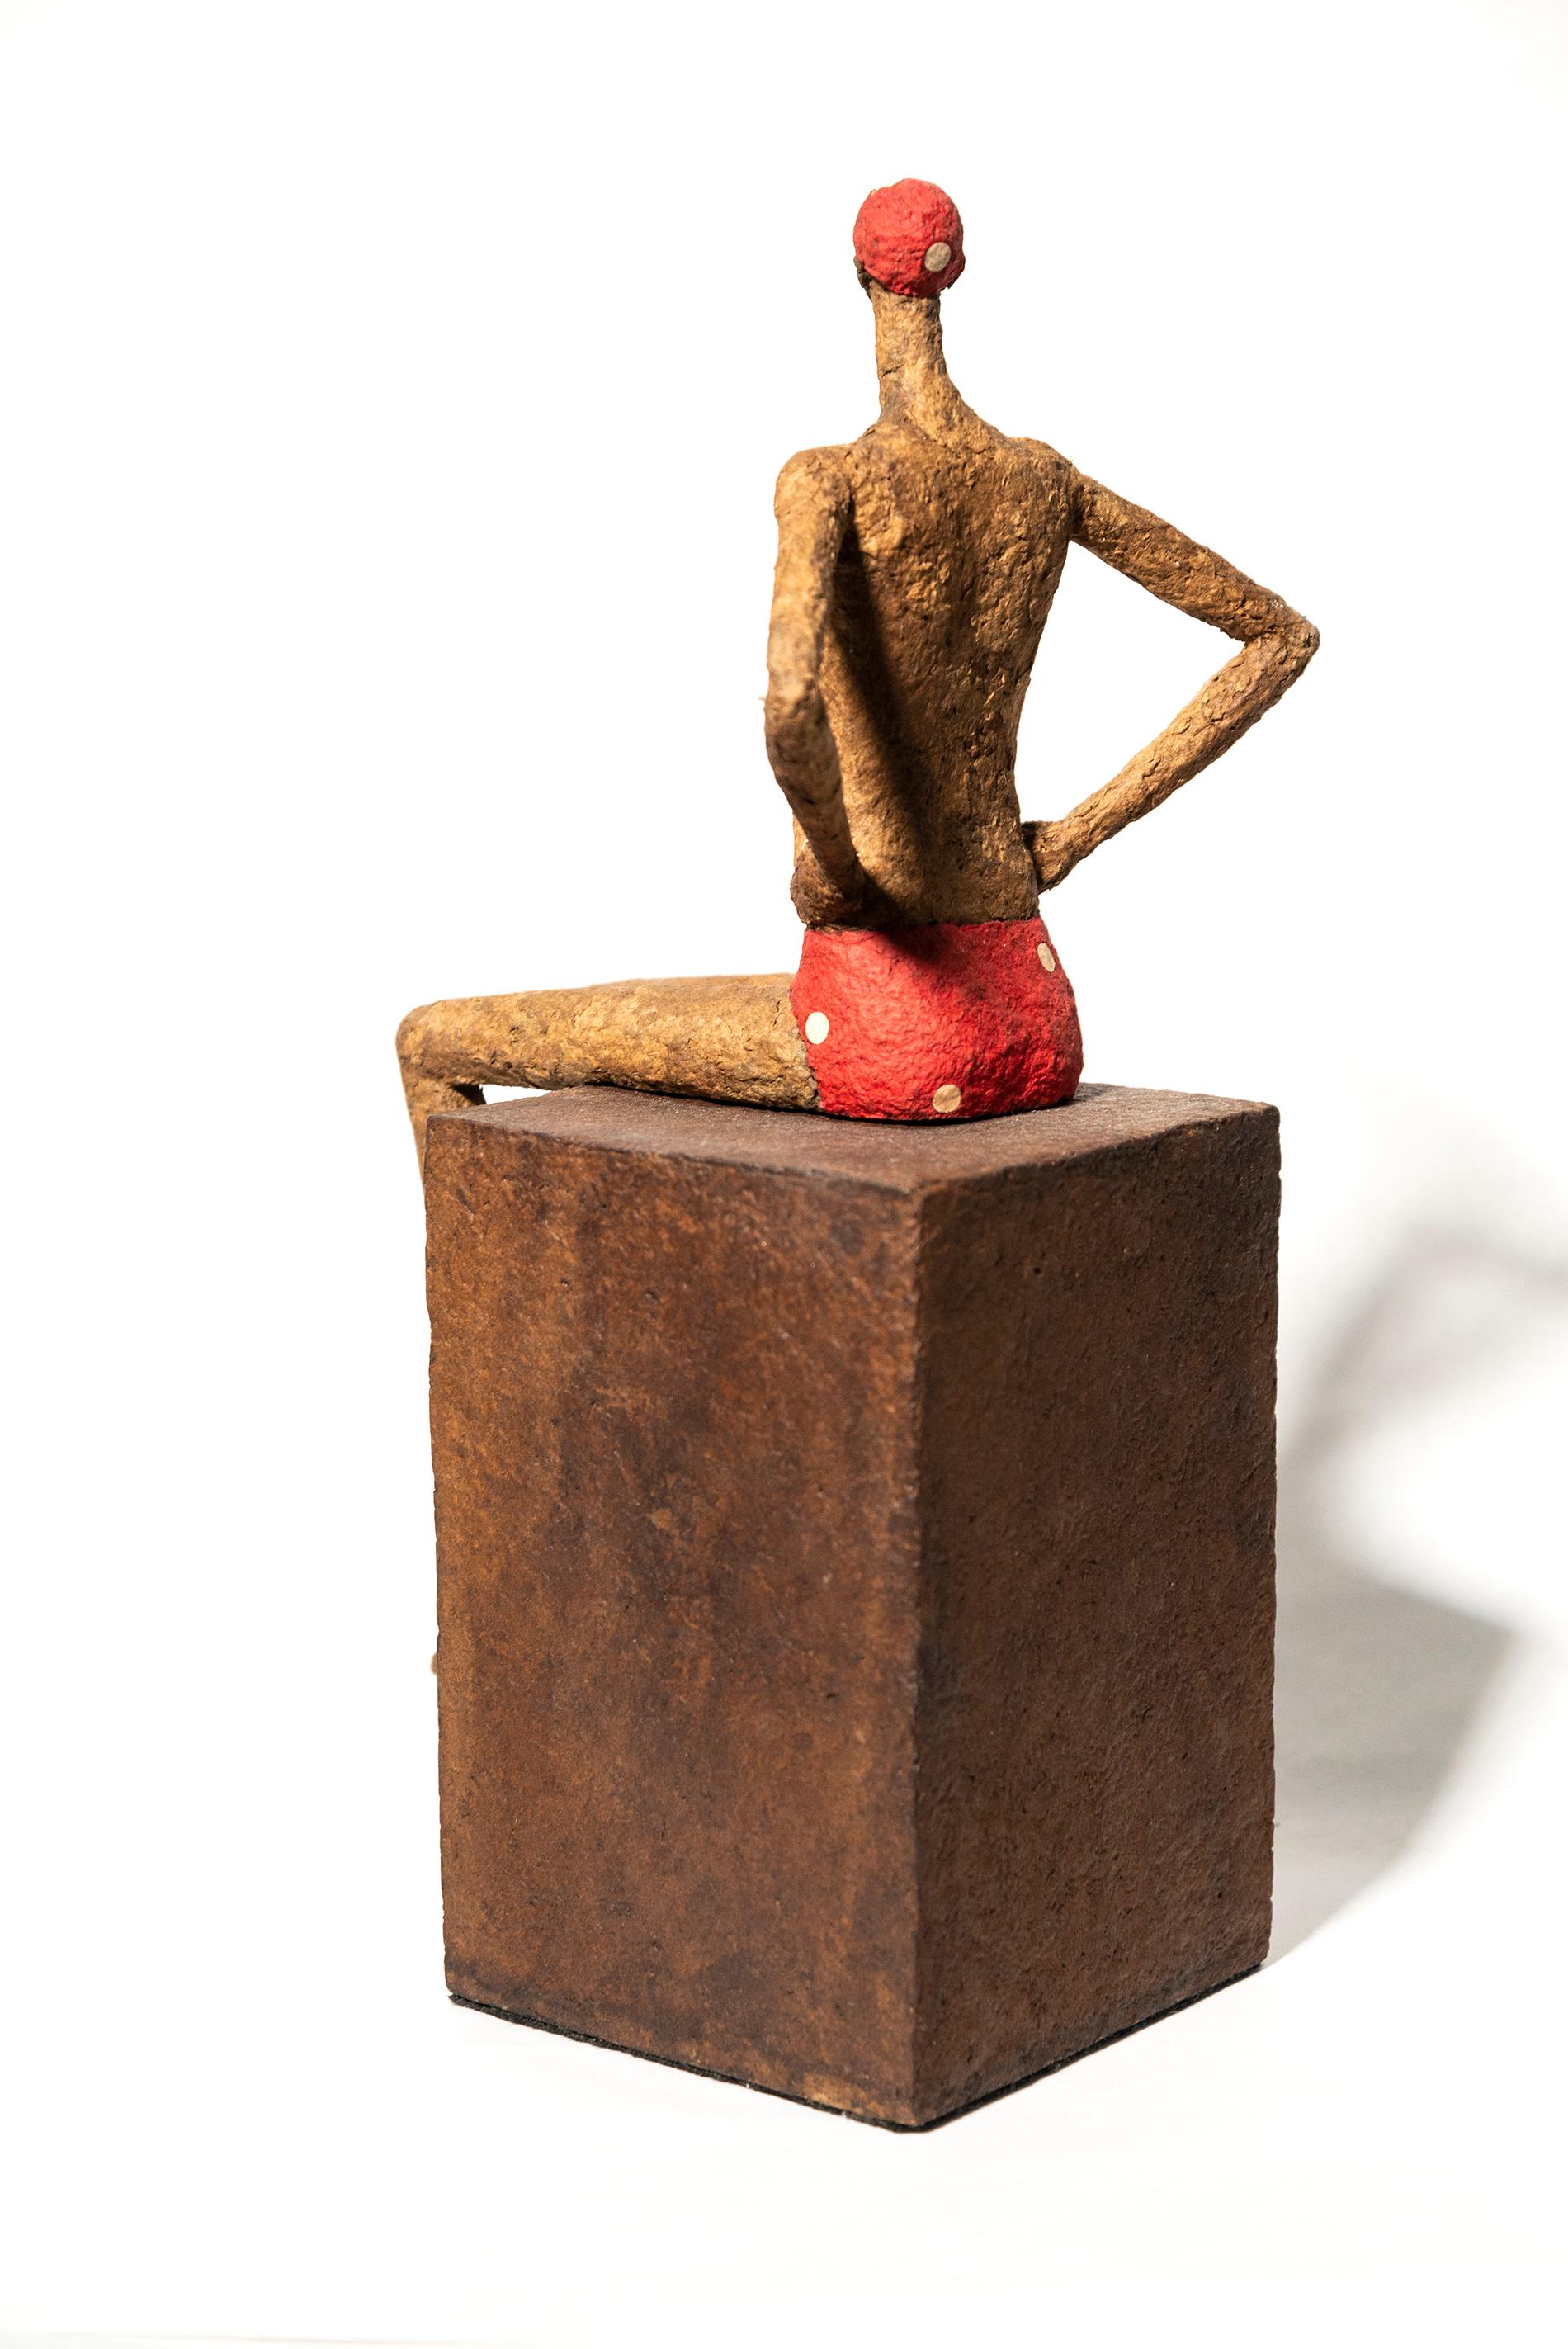 Quebec Artist Paul Duval’s series of small figurative tabletop sculptures capture the essence of individual characters. Hand-shaped from wire and paper mache, each character is unique—this piece is a swimmer (baigneur) sporting a red bathing suit